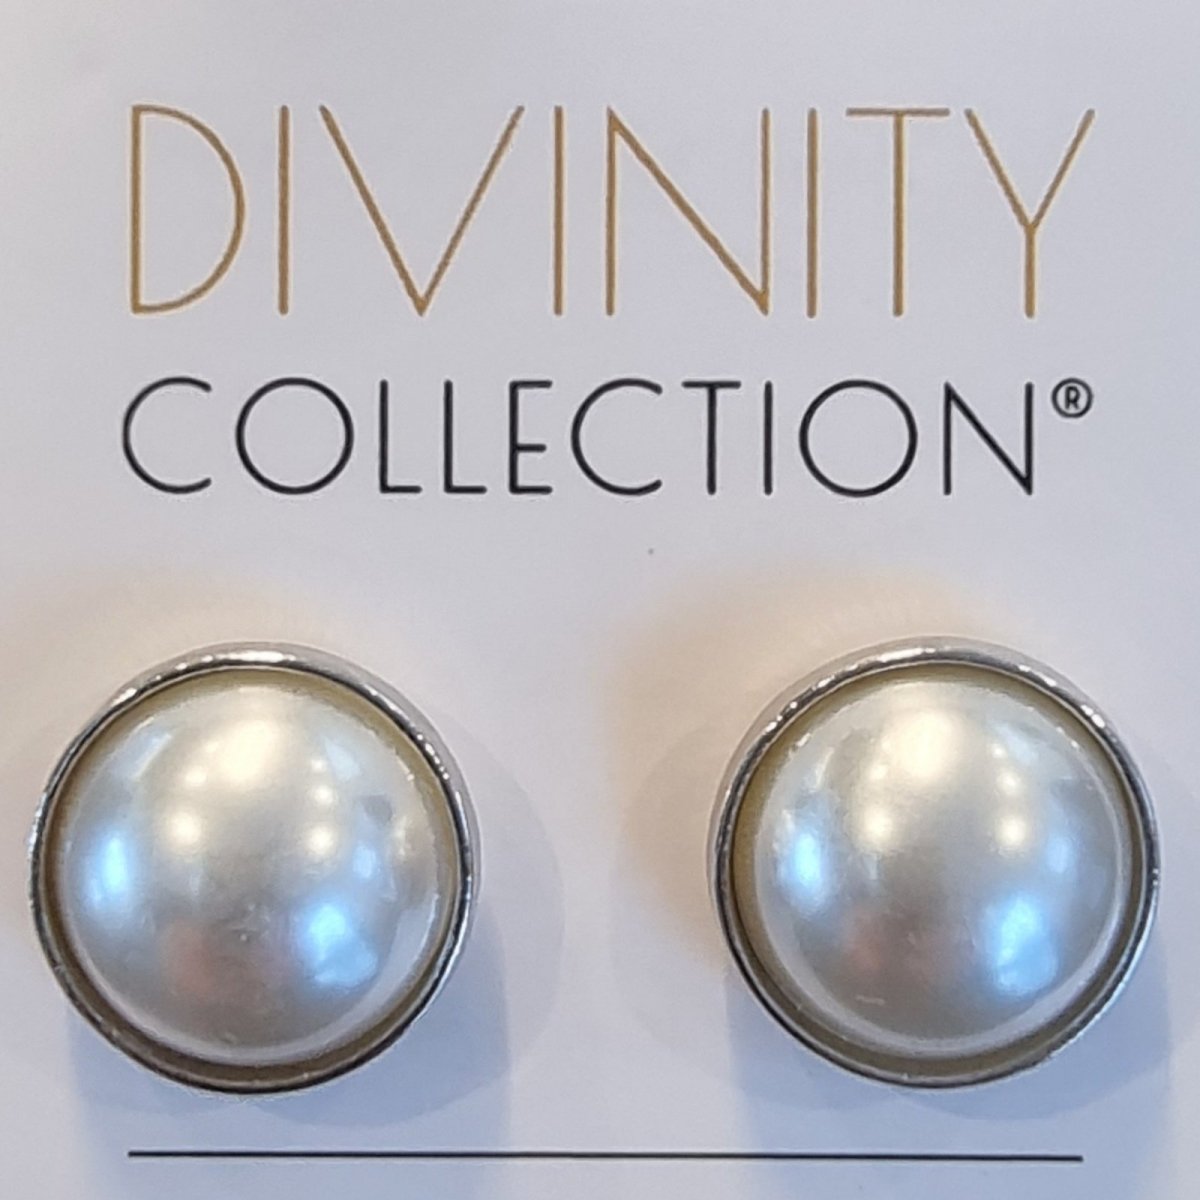 2 Pairs Magnetic Hijab Pearl Pins - White - Divinity Collection